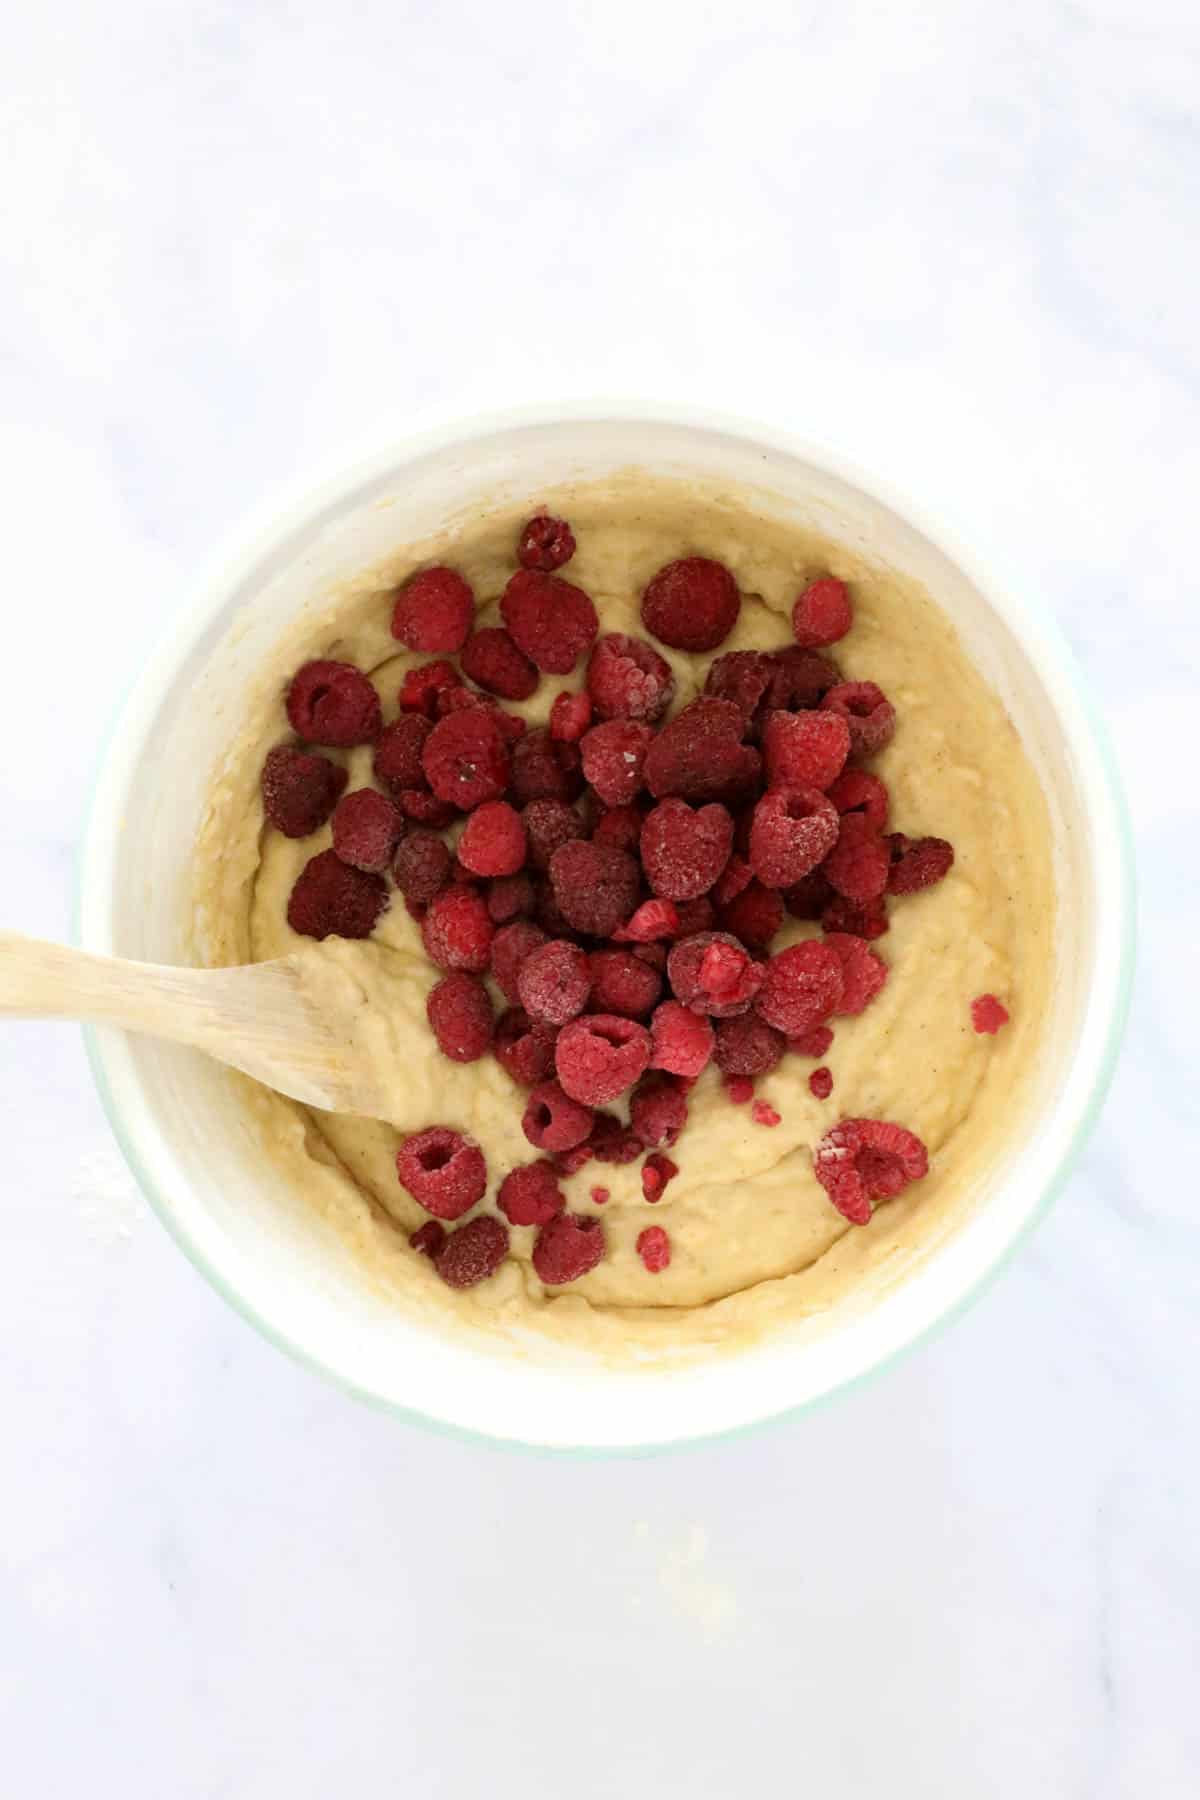 Raspberries added to mixture in a white bowl.